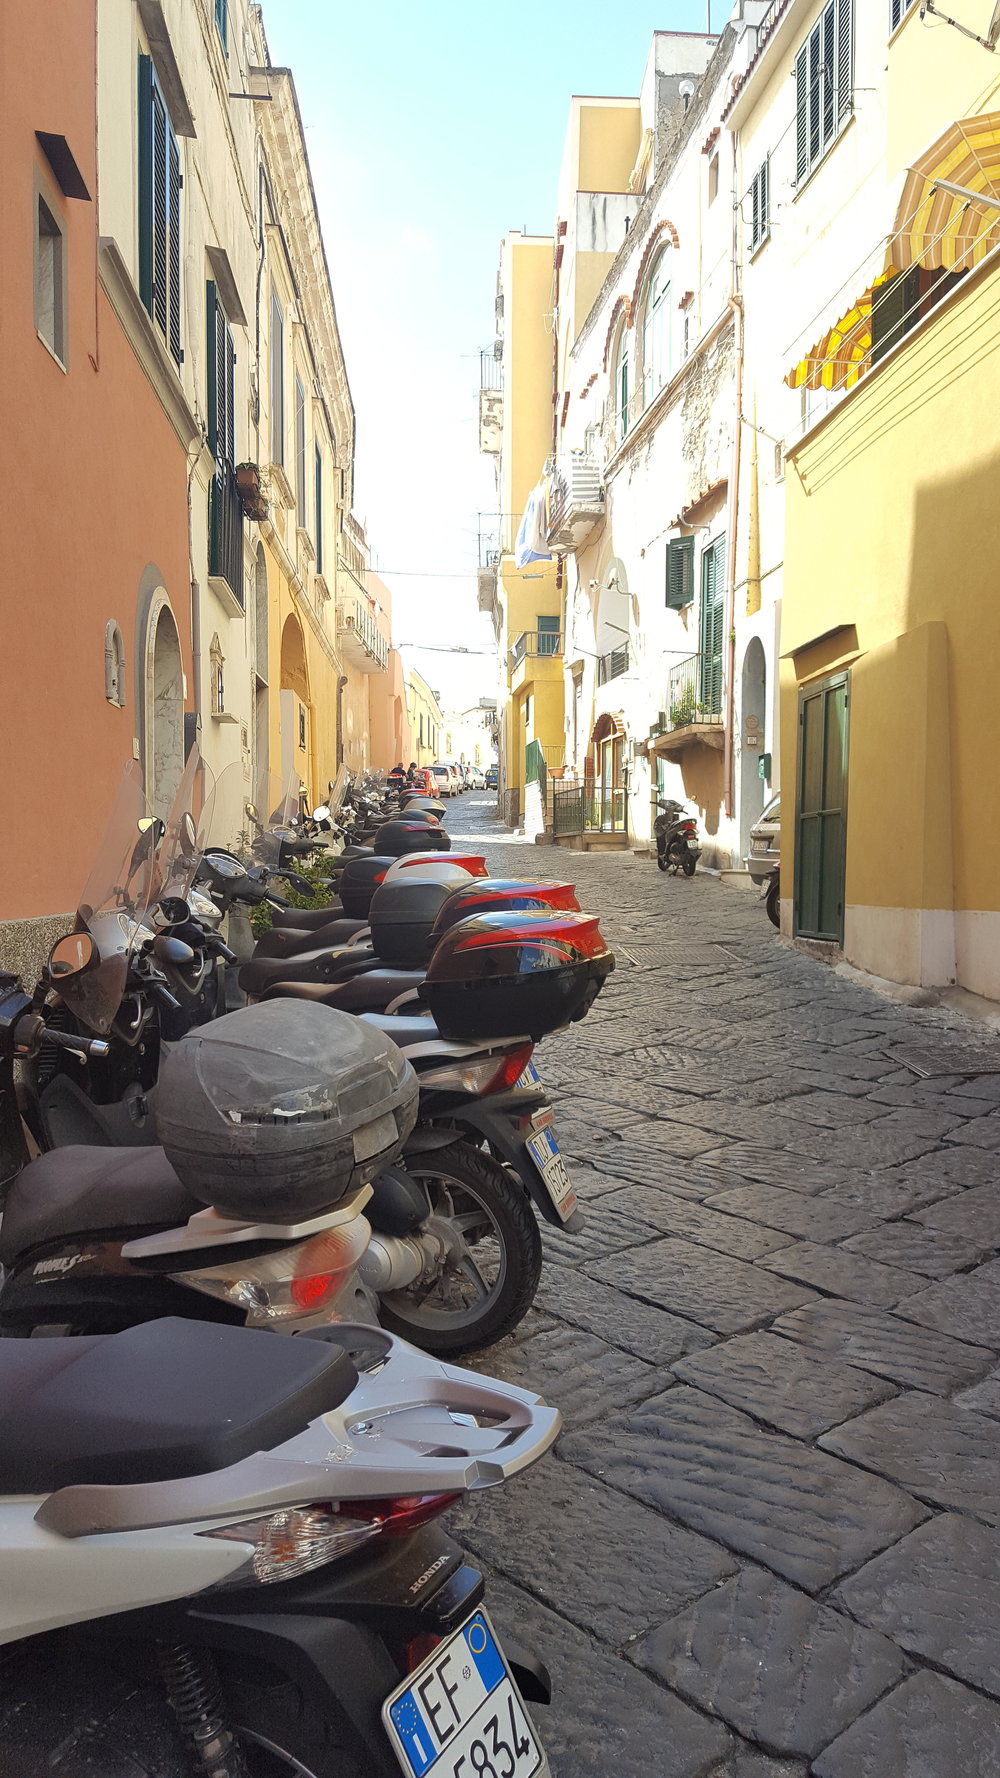  A typical street in Procida - packed with scooters. 